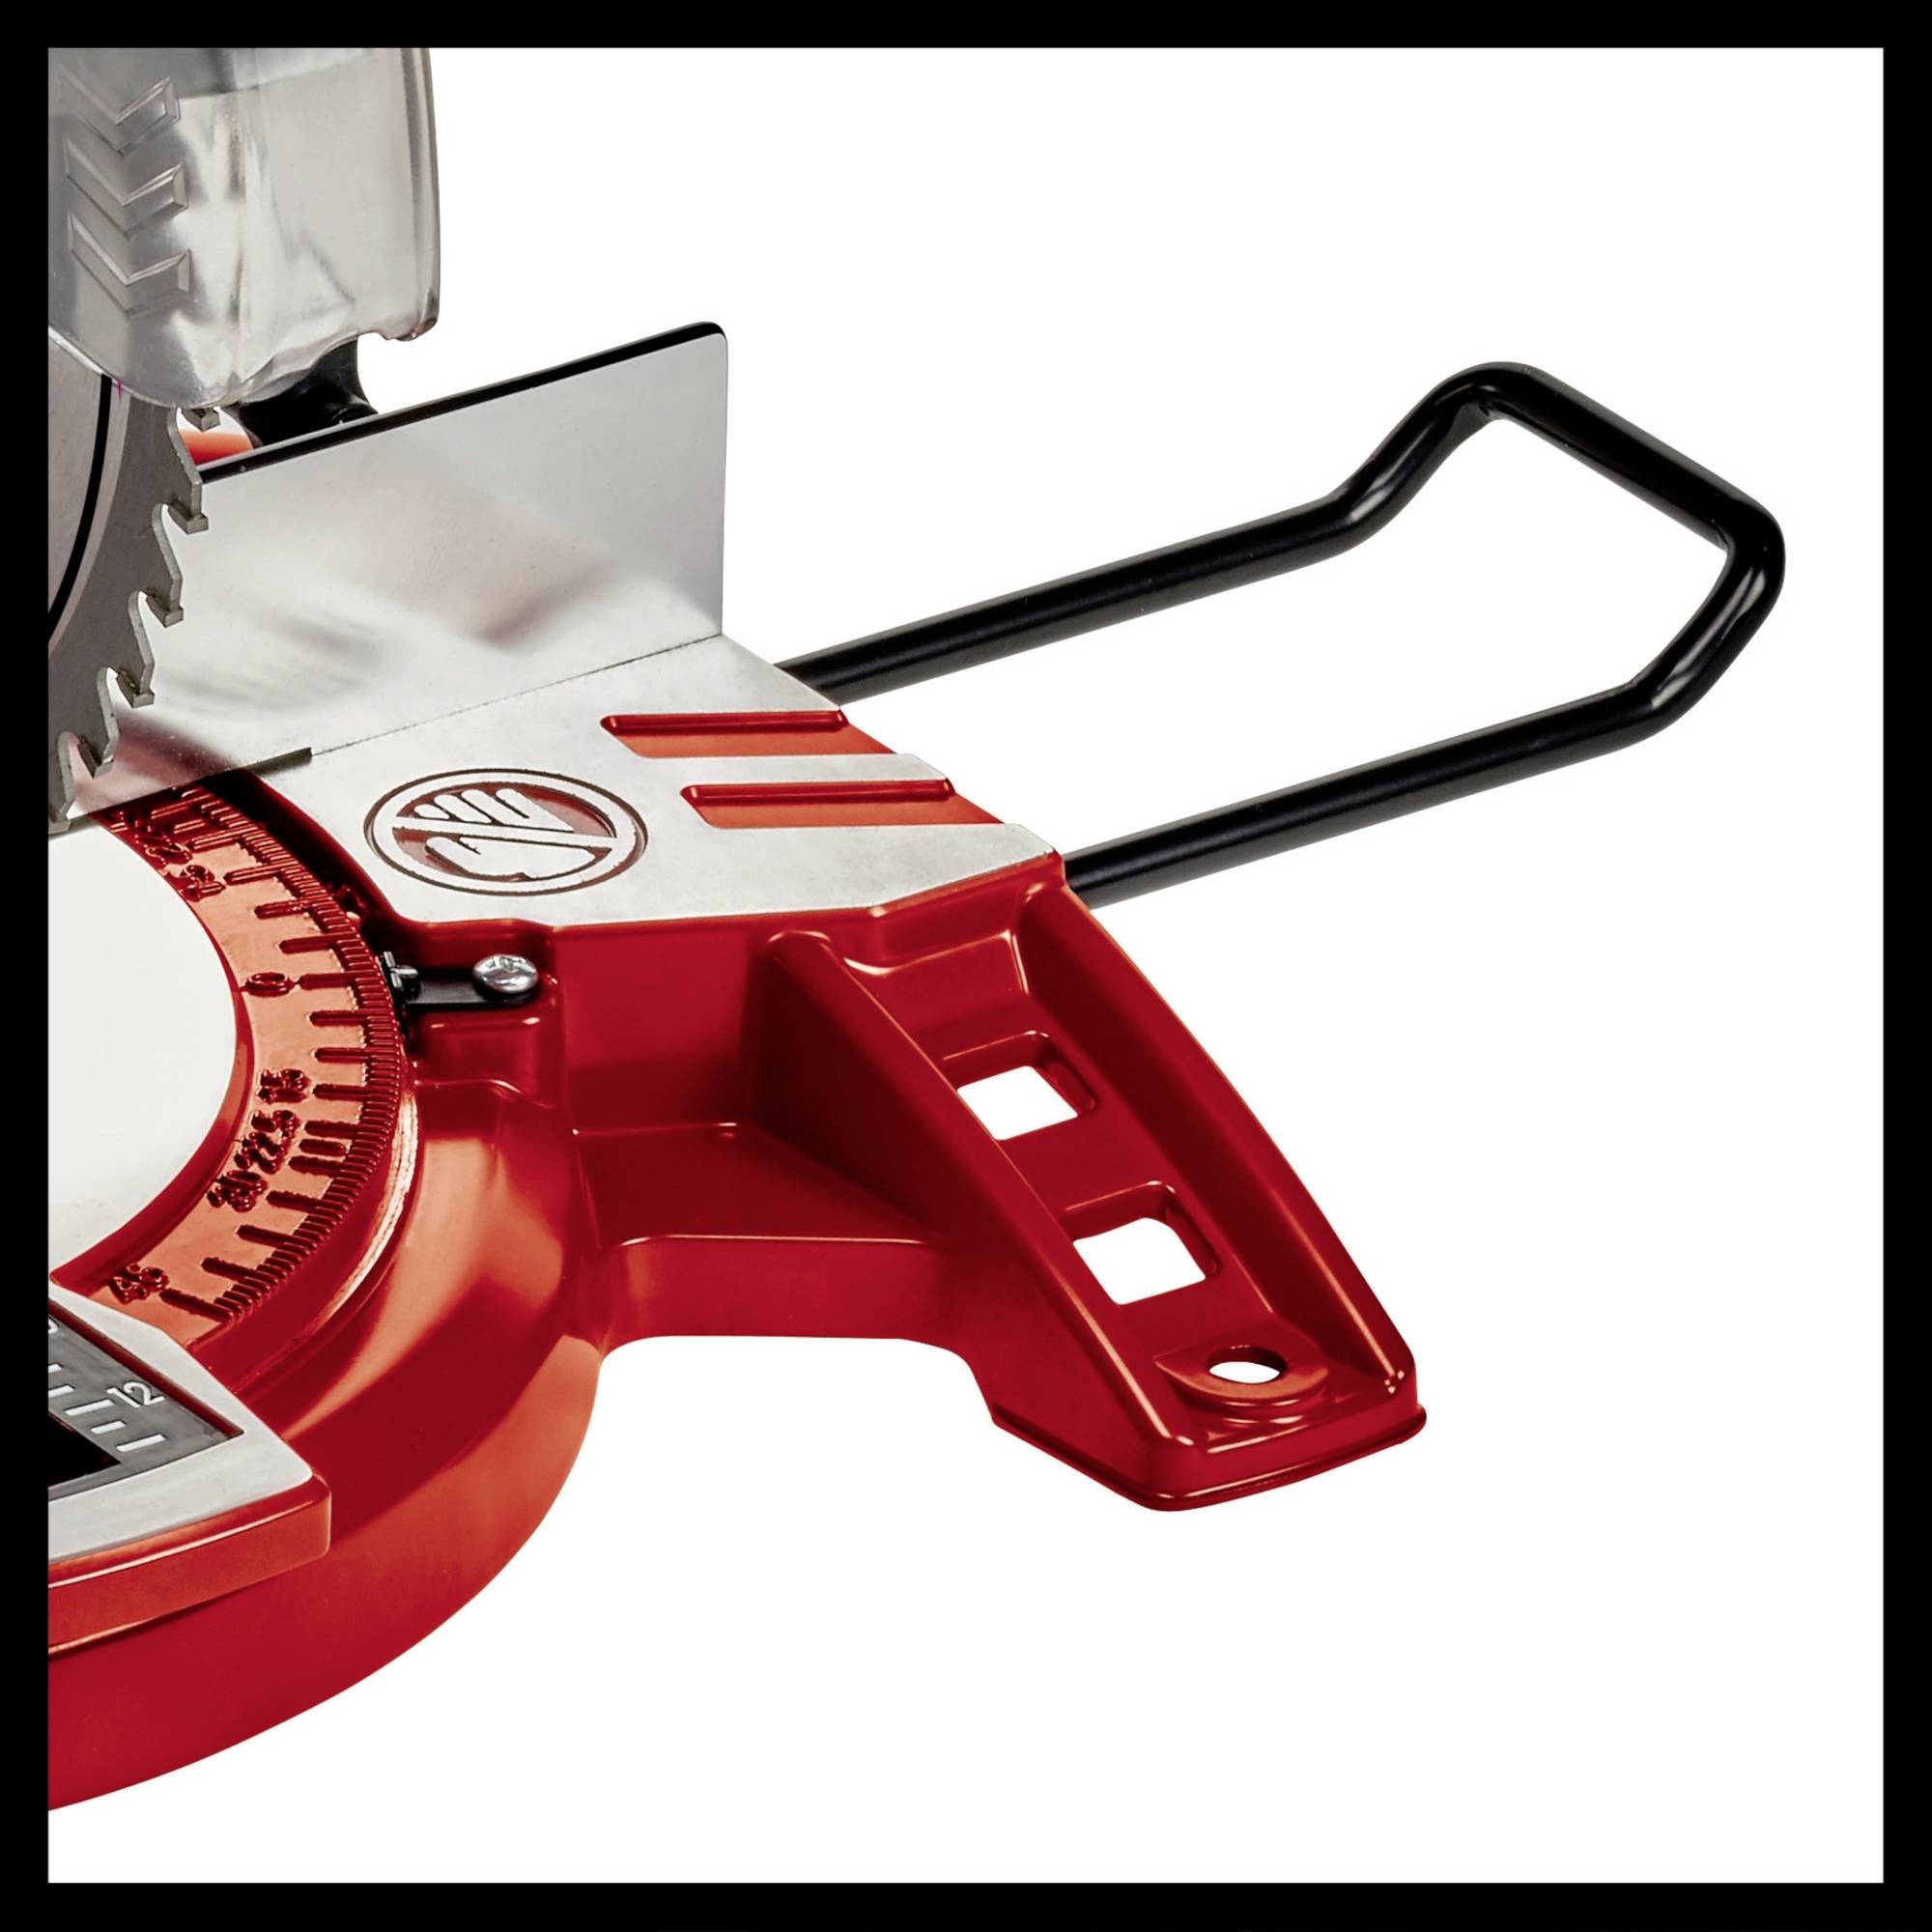 Einhell Mitre Saw TC-MS 2112 Power Tool Services